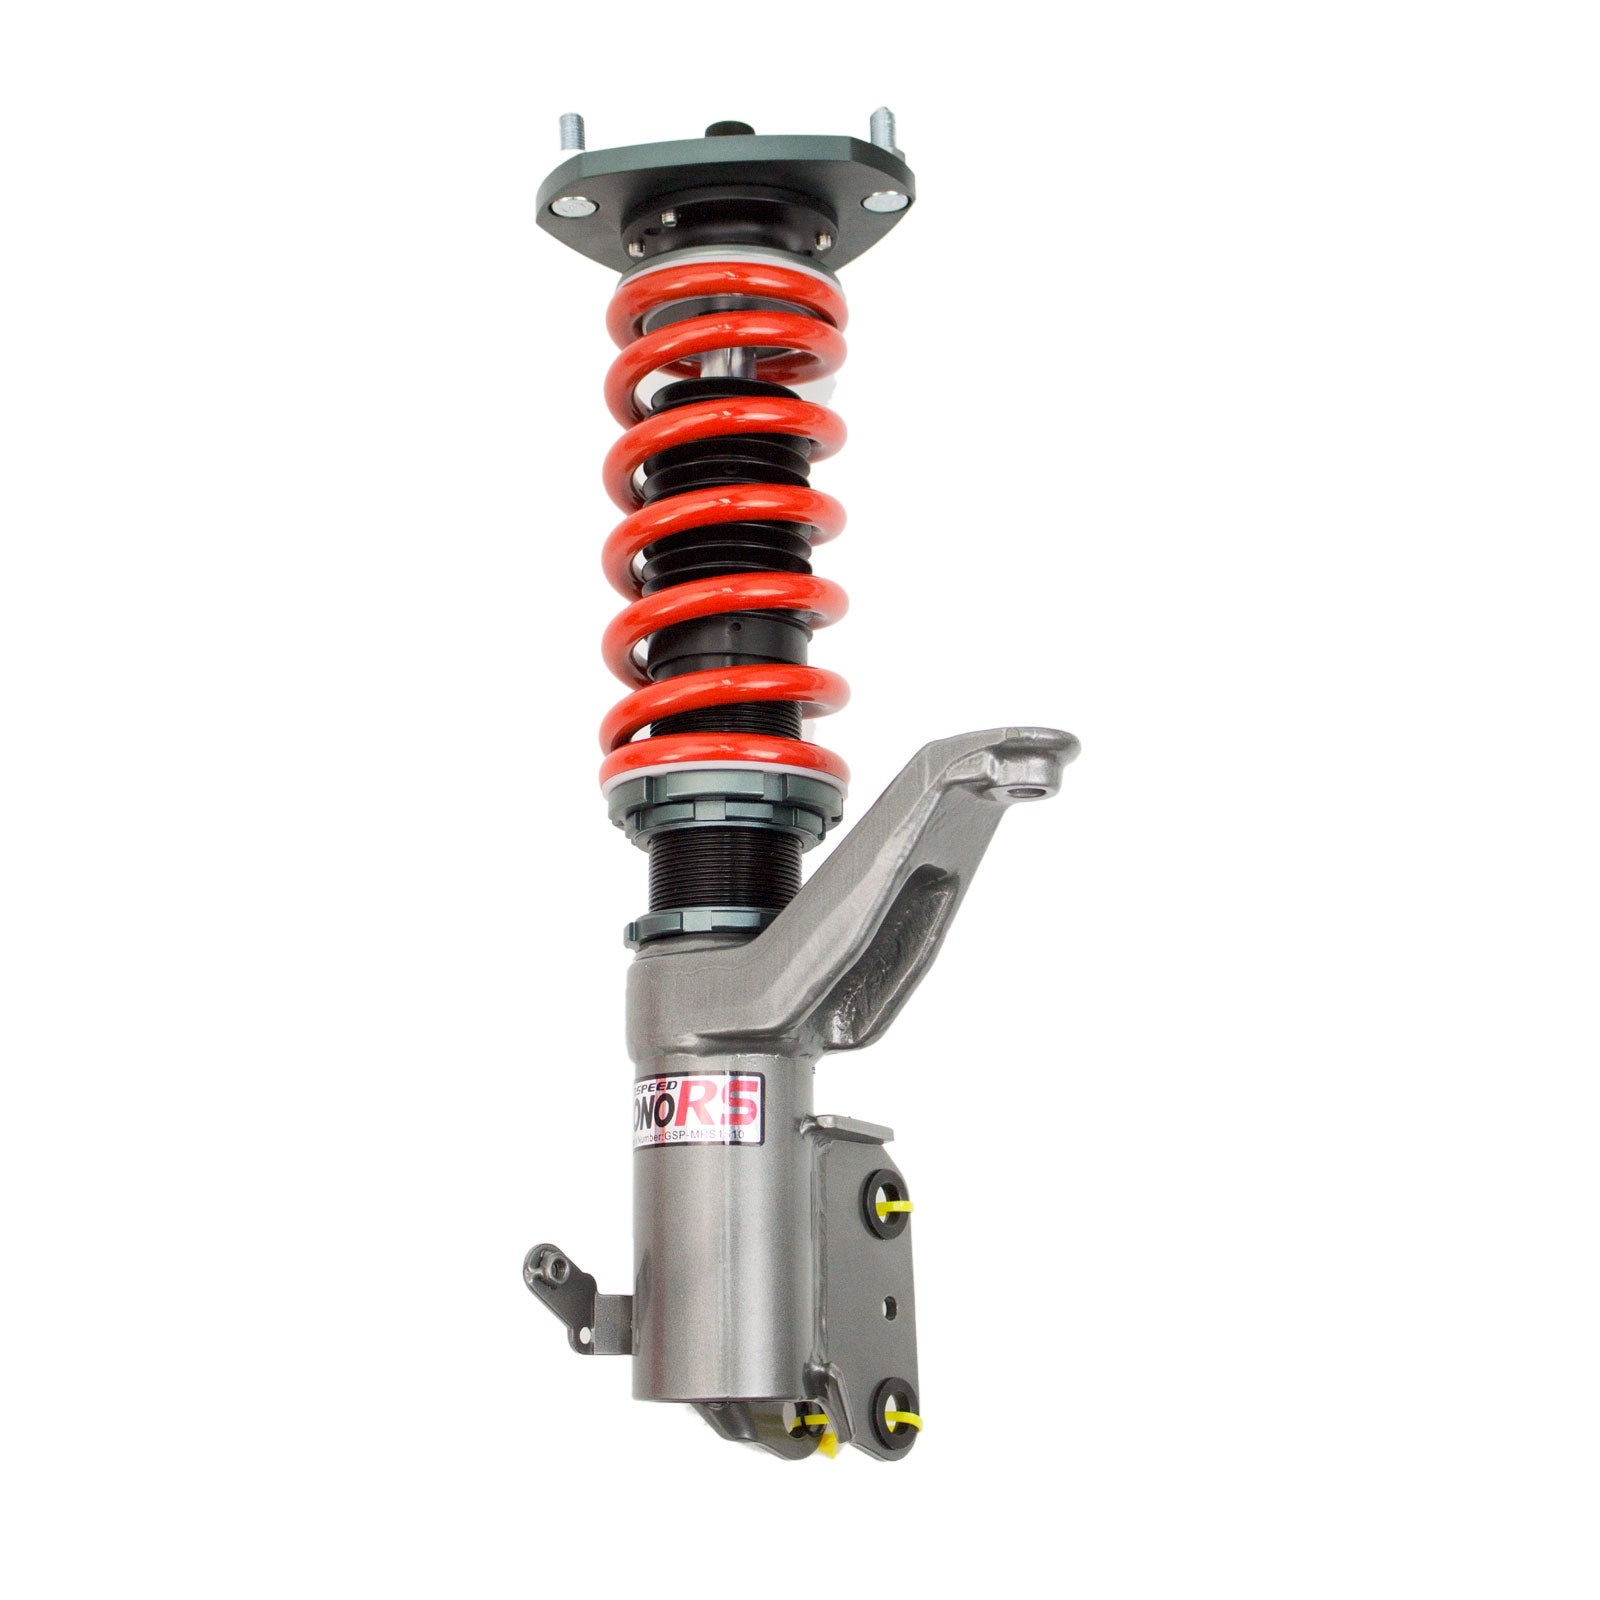 Godspeed MRS1510-A MonoRS Coilover Lowering Kit, 32 Damping Adjustment, Ride Height Adjustable